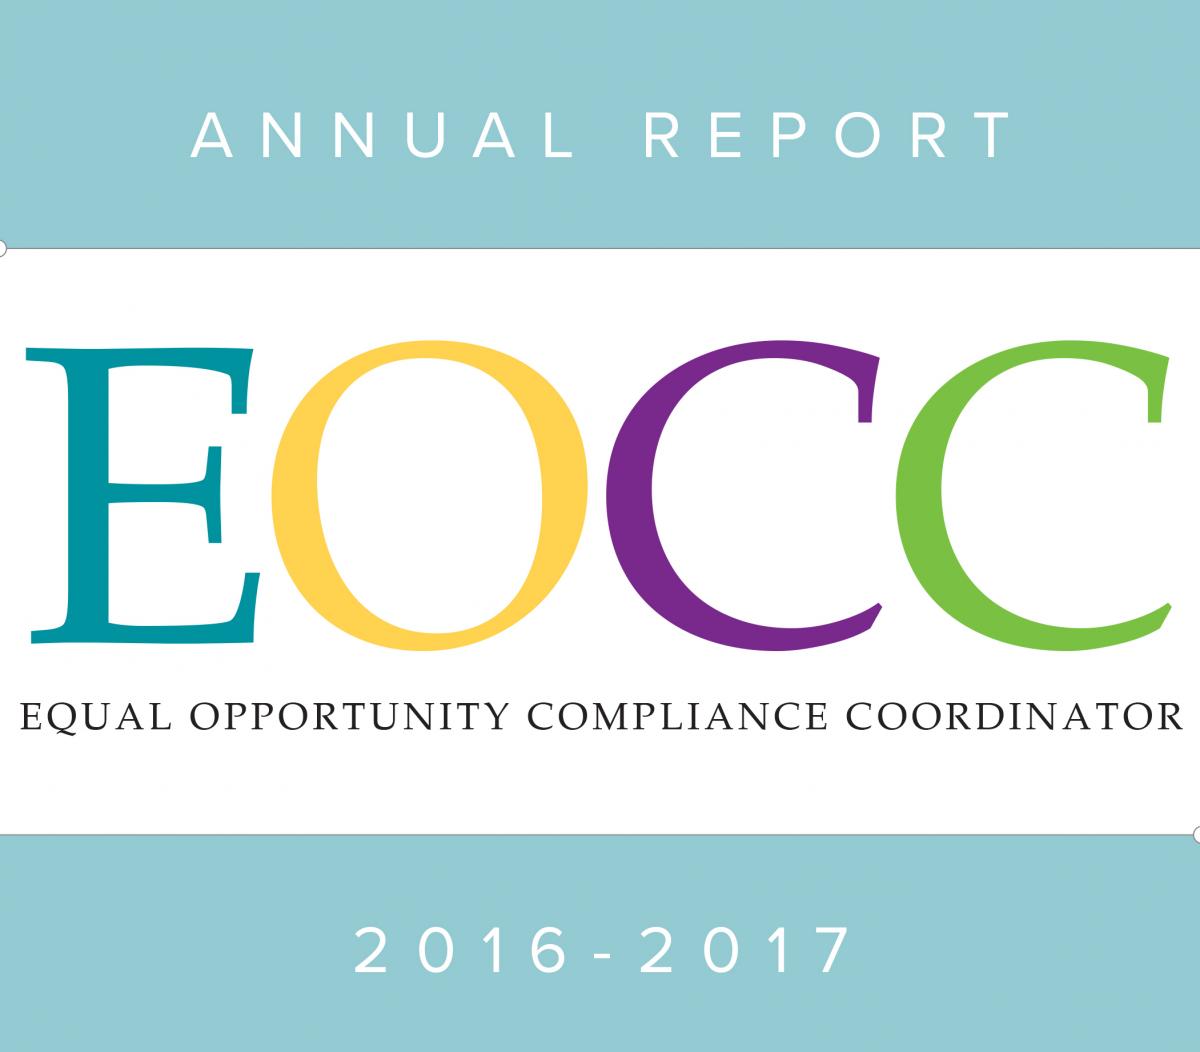 Equal Opportunity Compliance Coordinator (EOCC) Annual Report 2016-2017